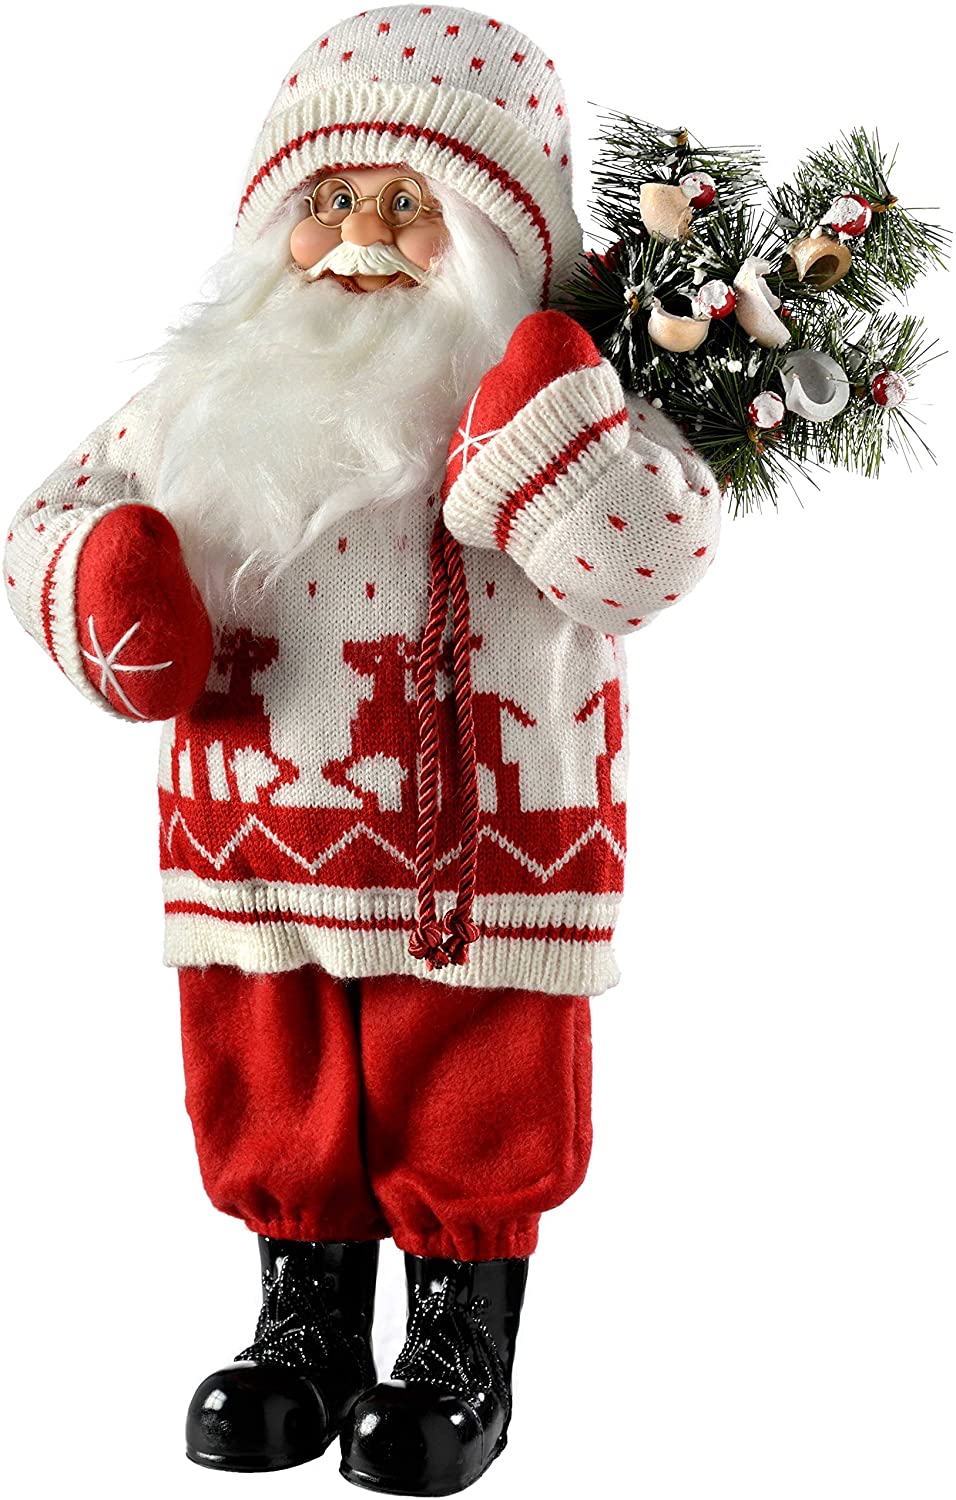 WeRChristmas 47 cm Standing Santa with Knitted Outfit Decoration, Red/White